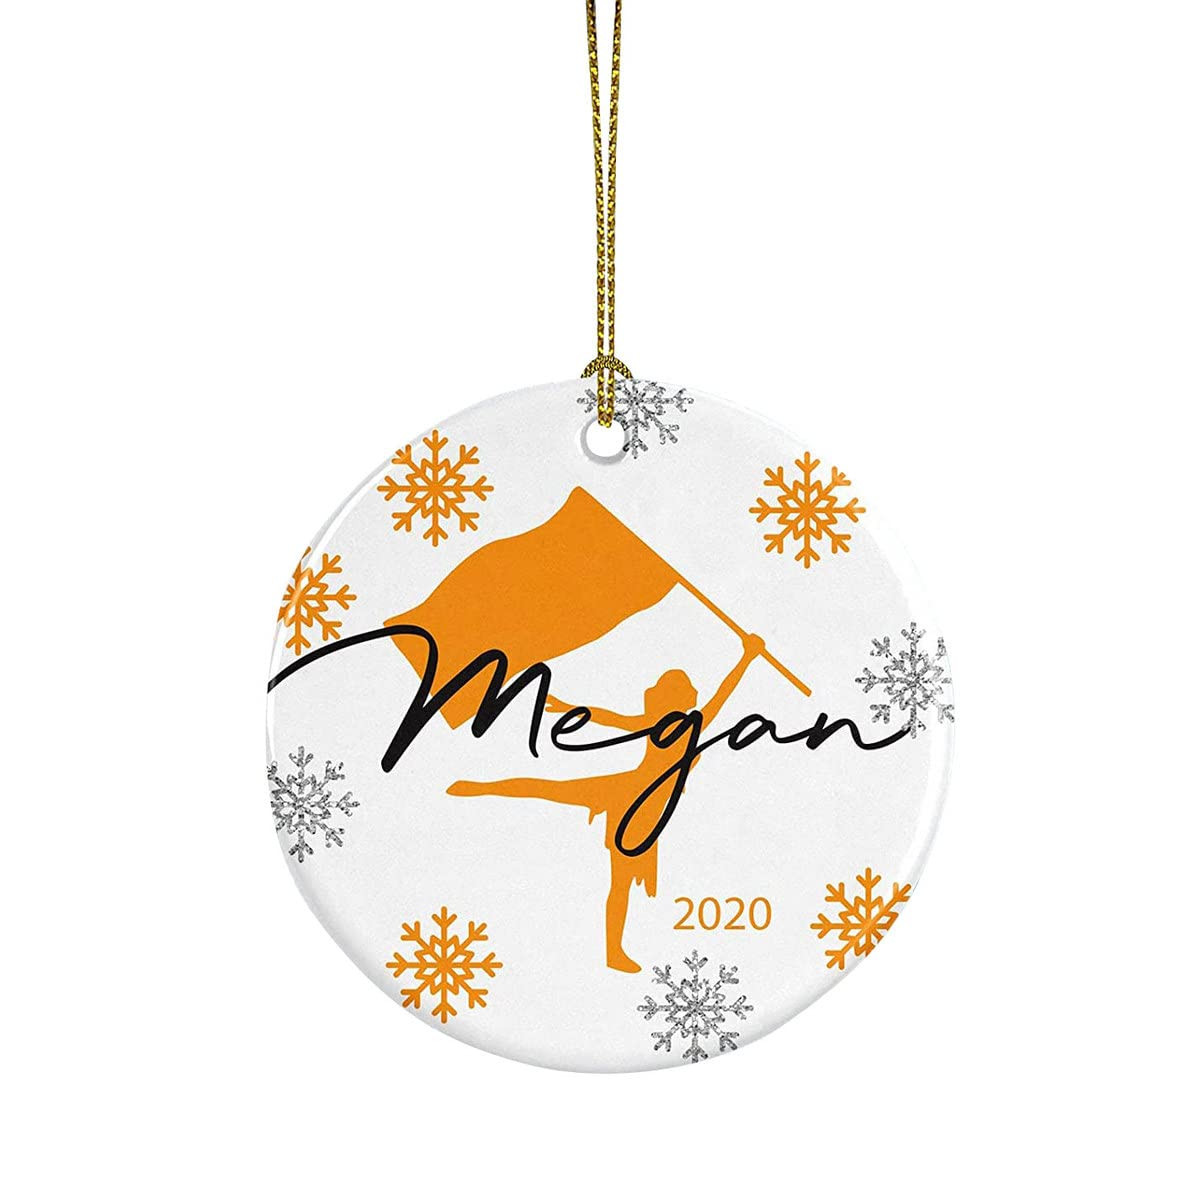 Personalized Color Guard Ornament Color Guard Design Gifts For Majorettes And Drill Team Christmas Ornament Hanging Decoration Christmas Tree Ornament